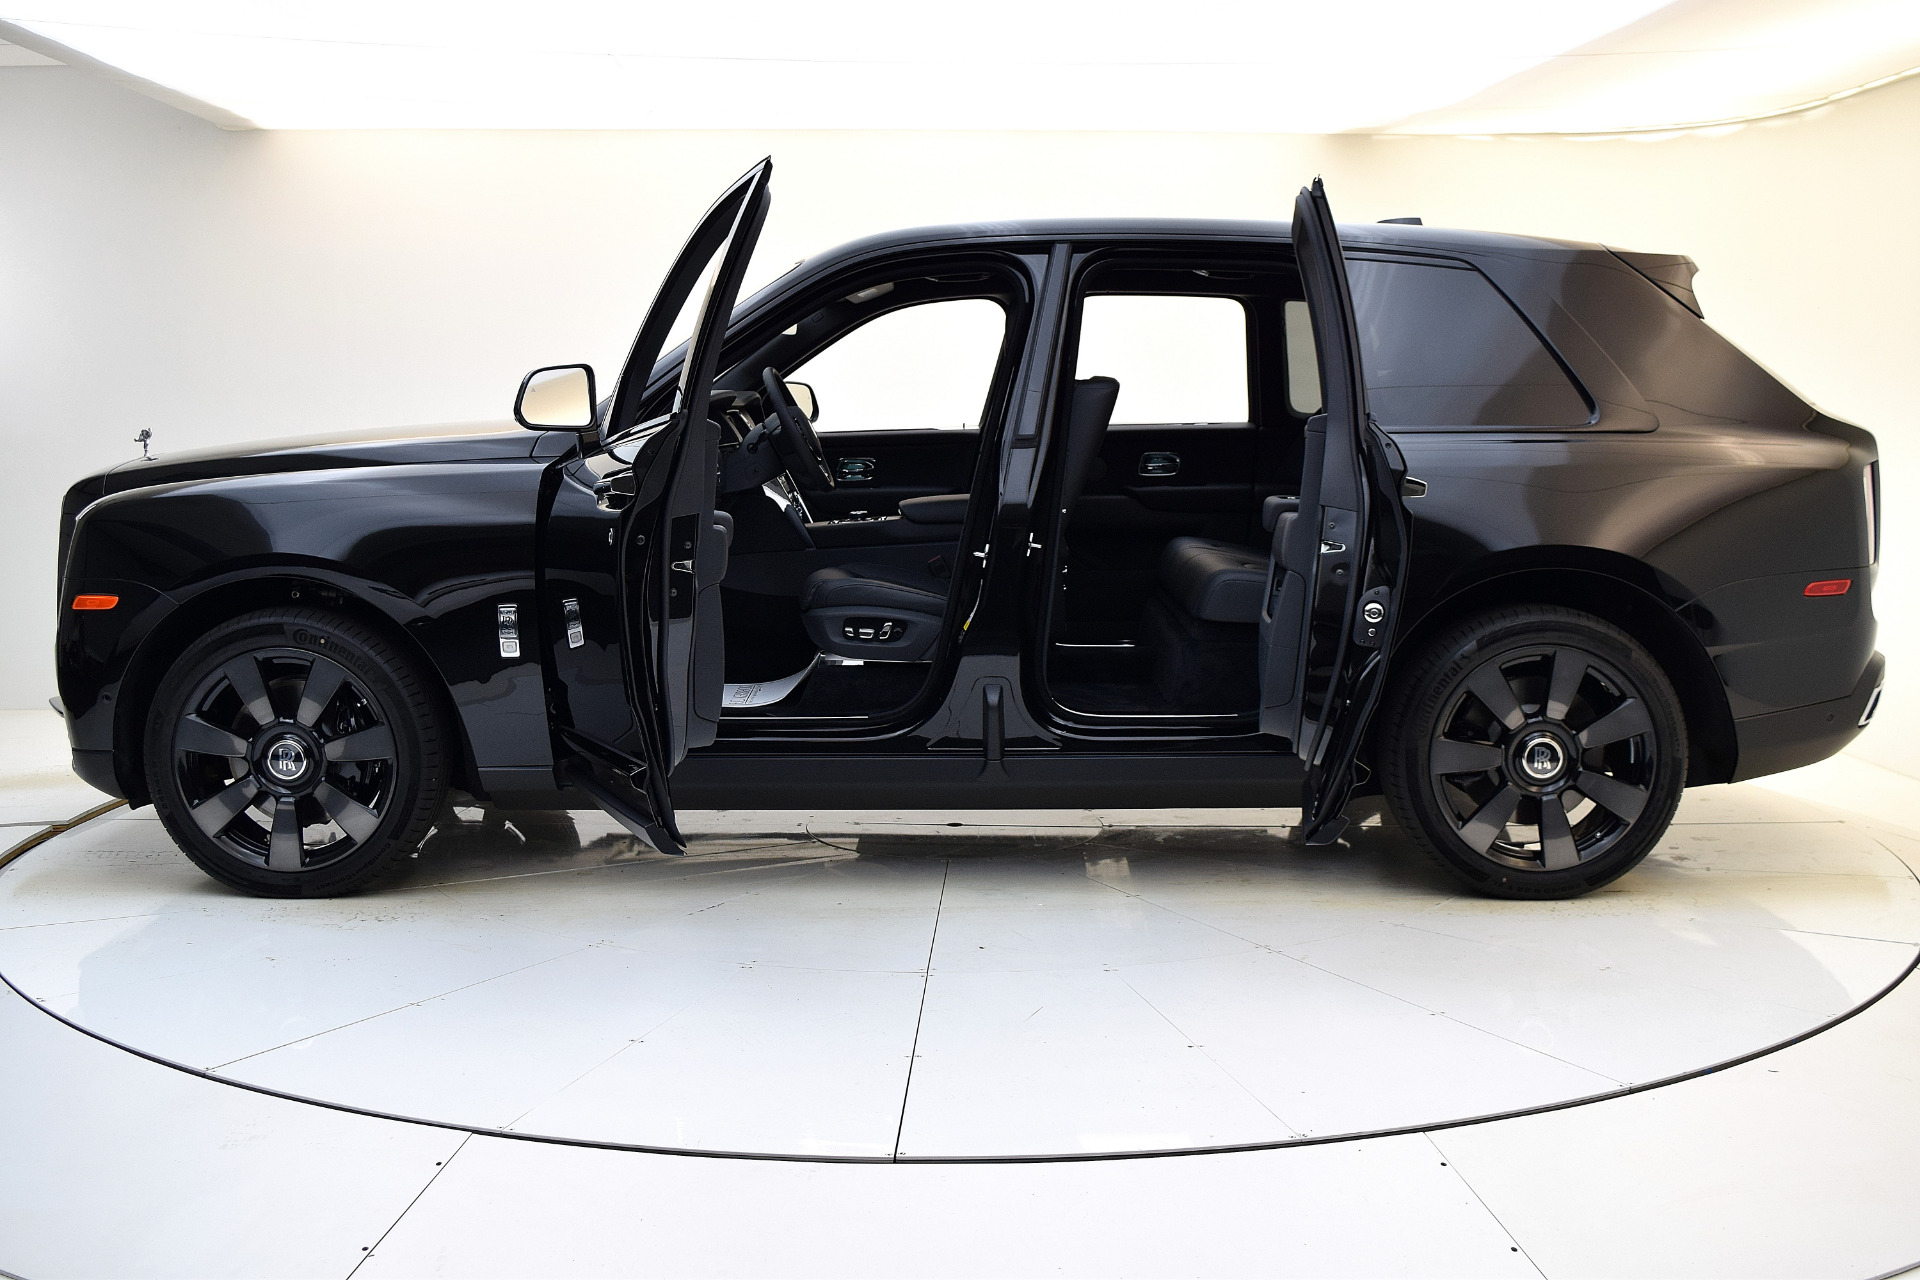 2021 Rolls-Royce Cullinan SUV Lease for $4925.0 month